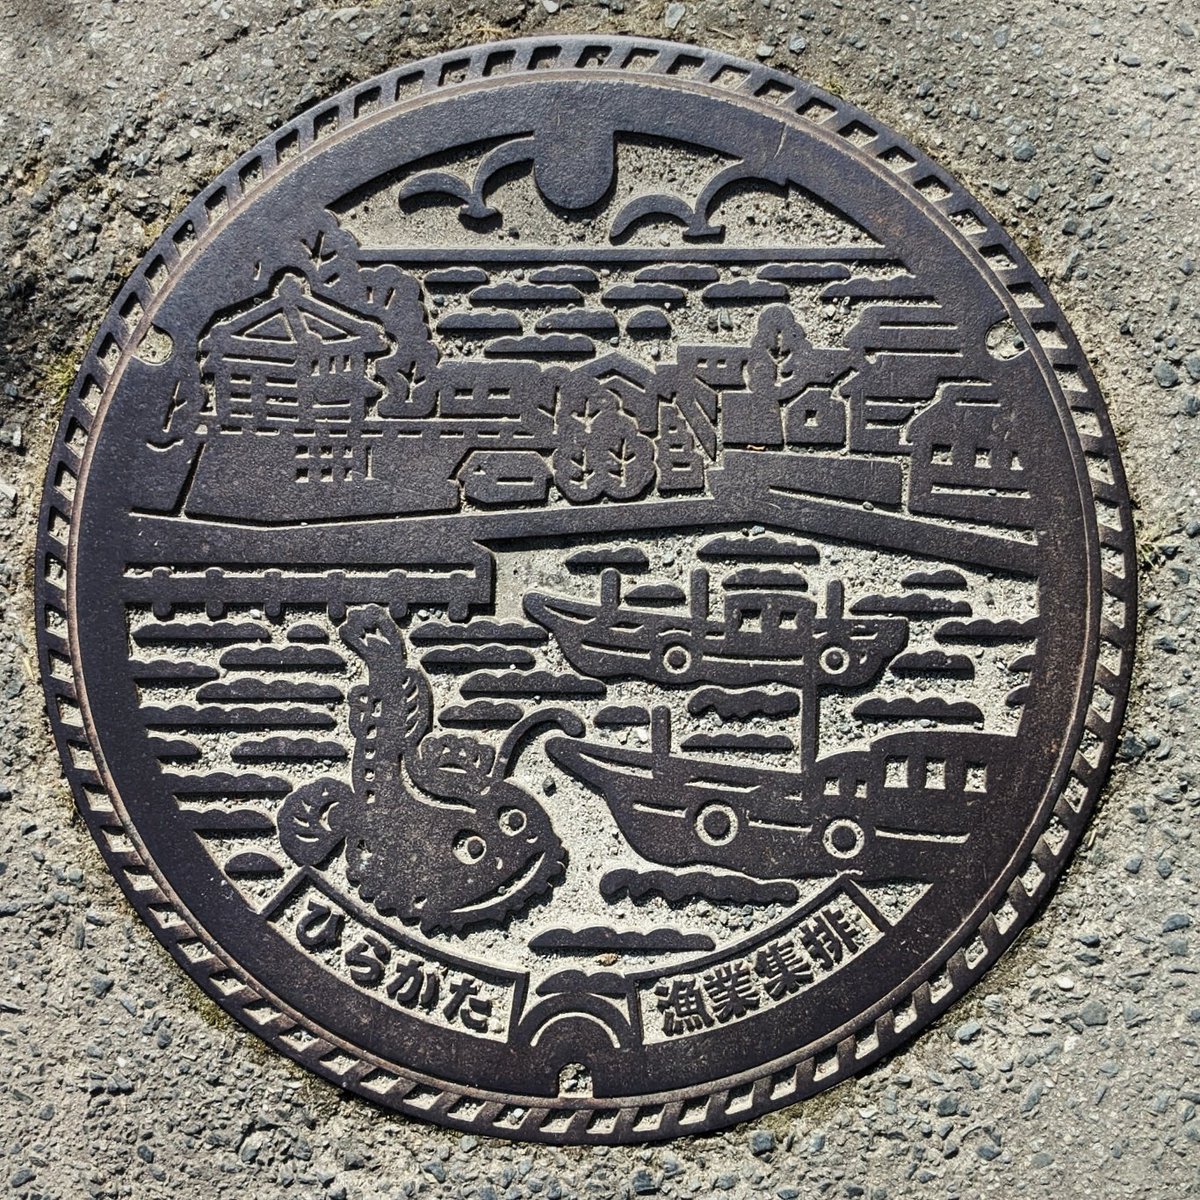 Two fishing boats at the port town of Hirakata, in Northern Ibaraki, alongside a giant Angler Fish, the locally caught speciality.
#manhole #manholecovermonday #マンホール